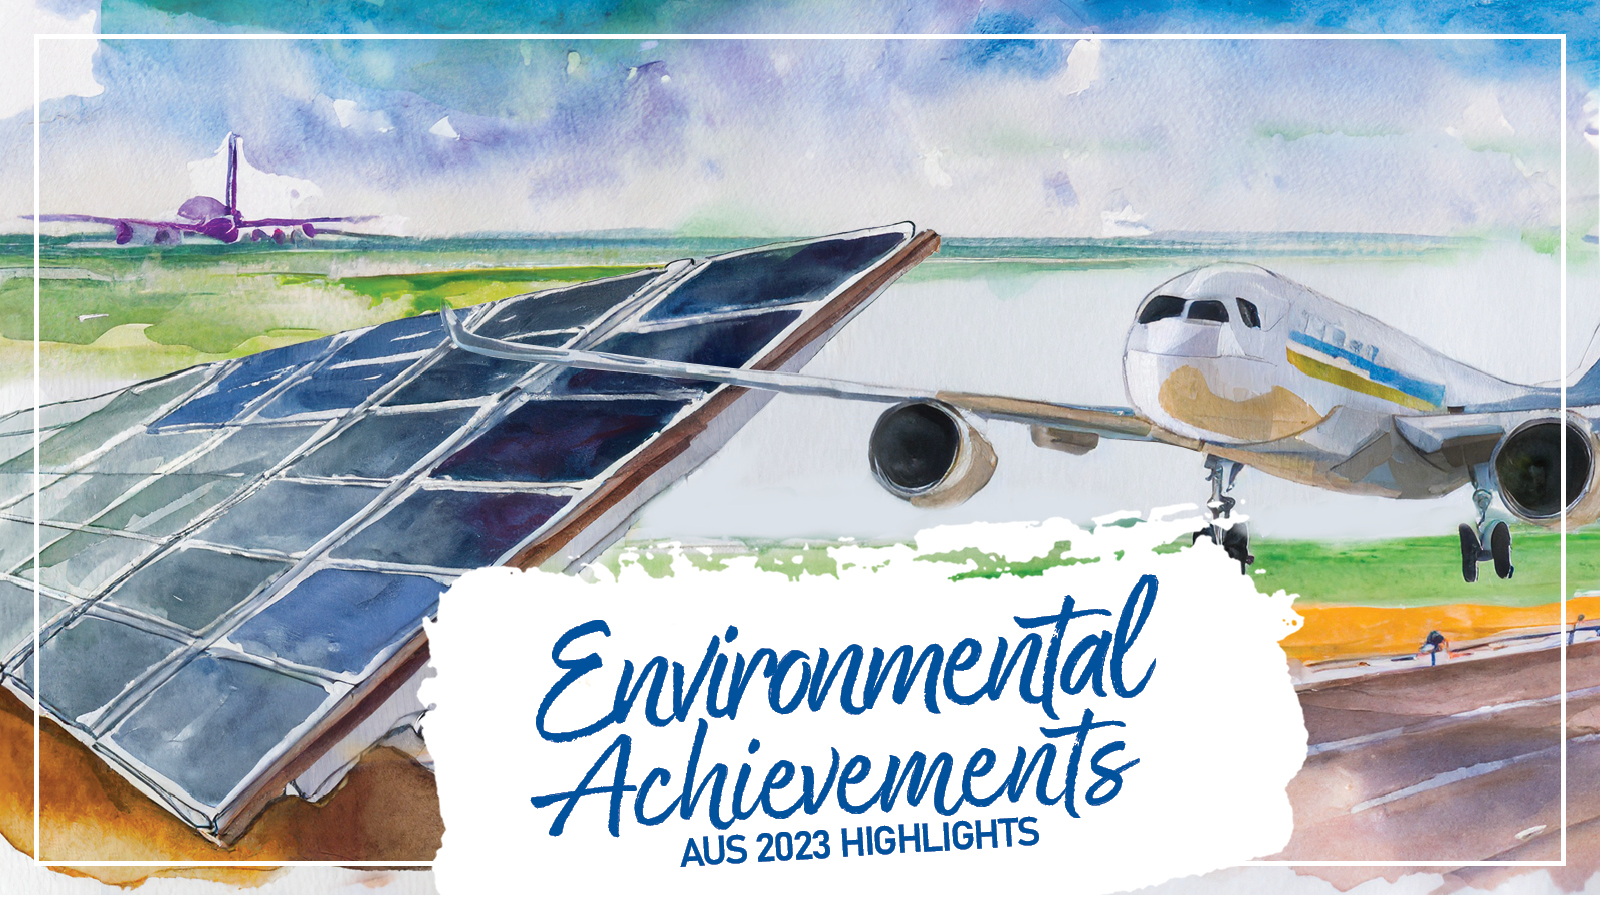 Illustration of an airfield in the background and solar panels in the foreground. Text reads: Environmental Achievements AUS 2023 Highlights